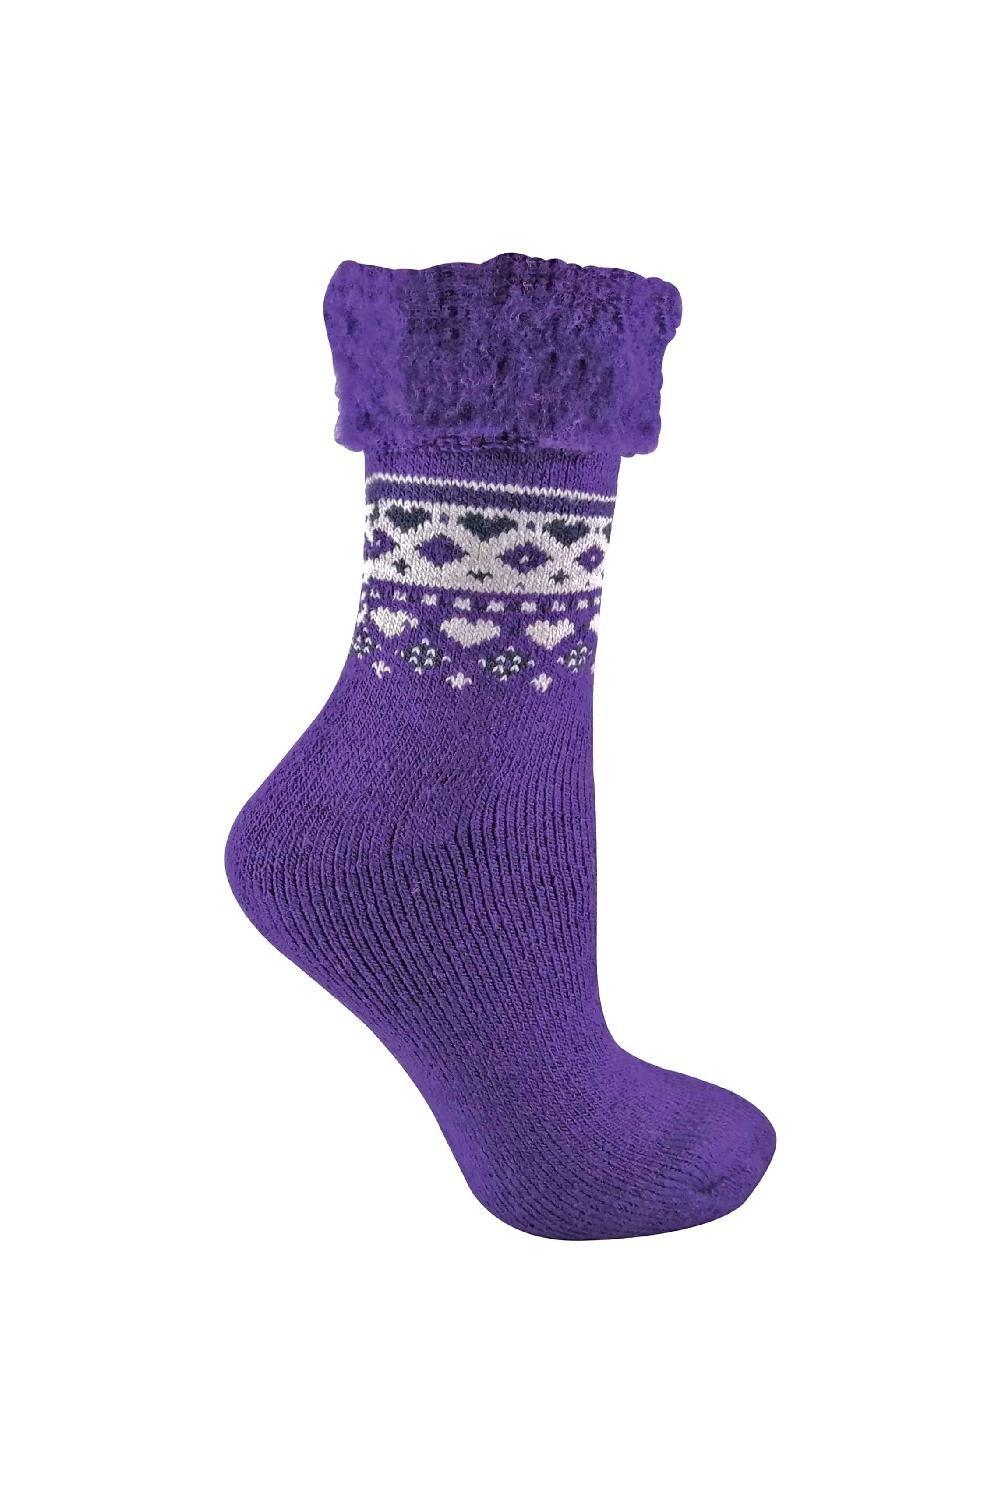 Turn Over Top Warm Thermal Winter Nordic Bed Socks